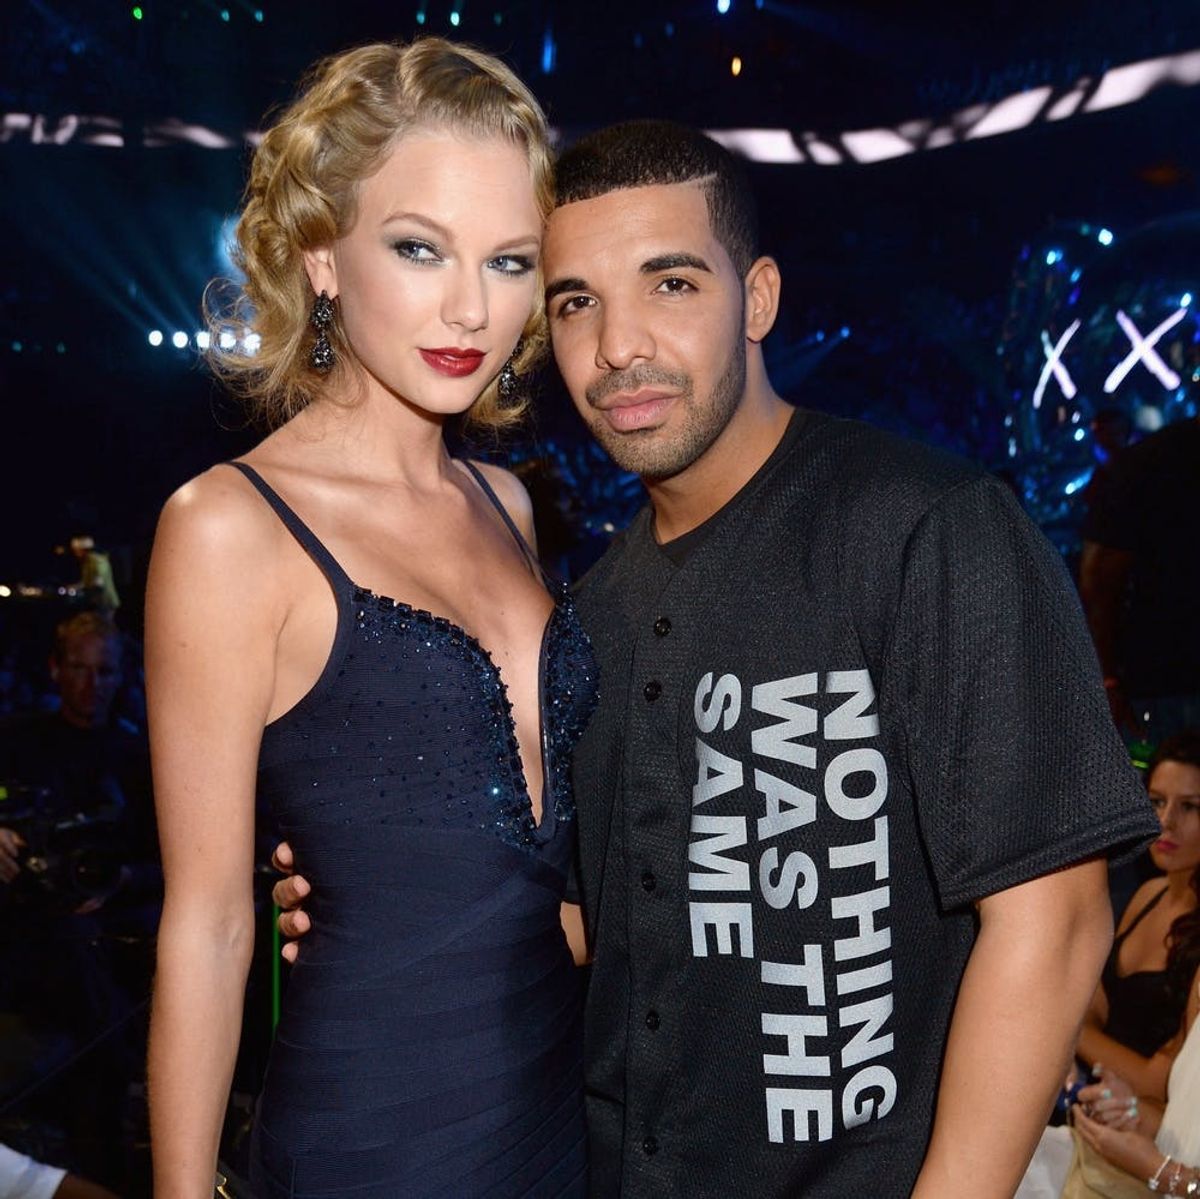 Karlie Kloss May Have Just Confirmed That Drake and Taylor Swift Are Dating